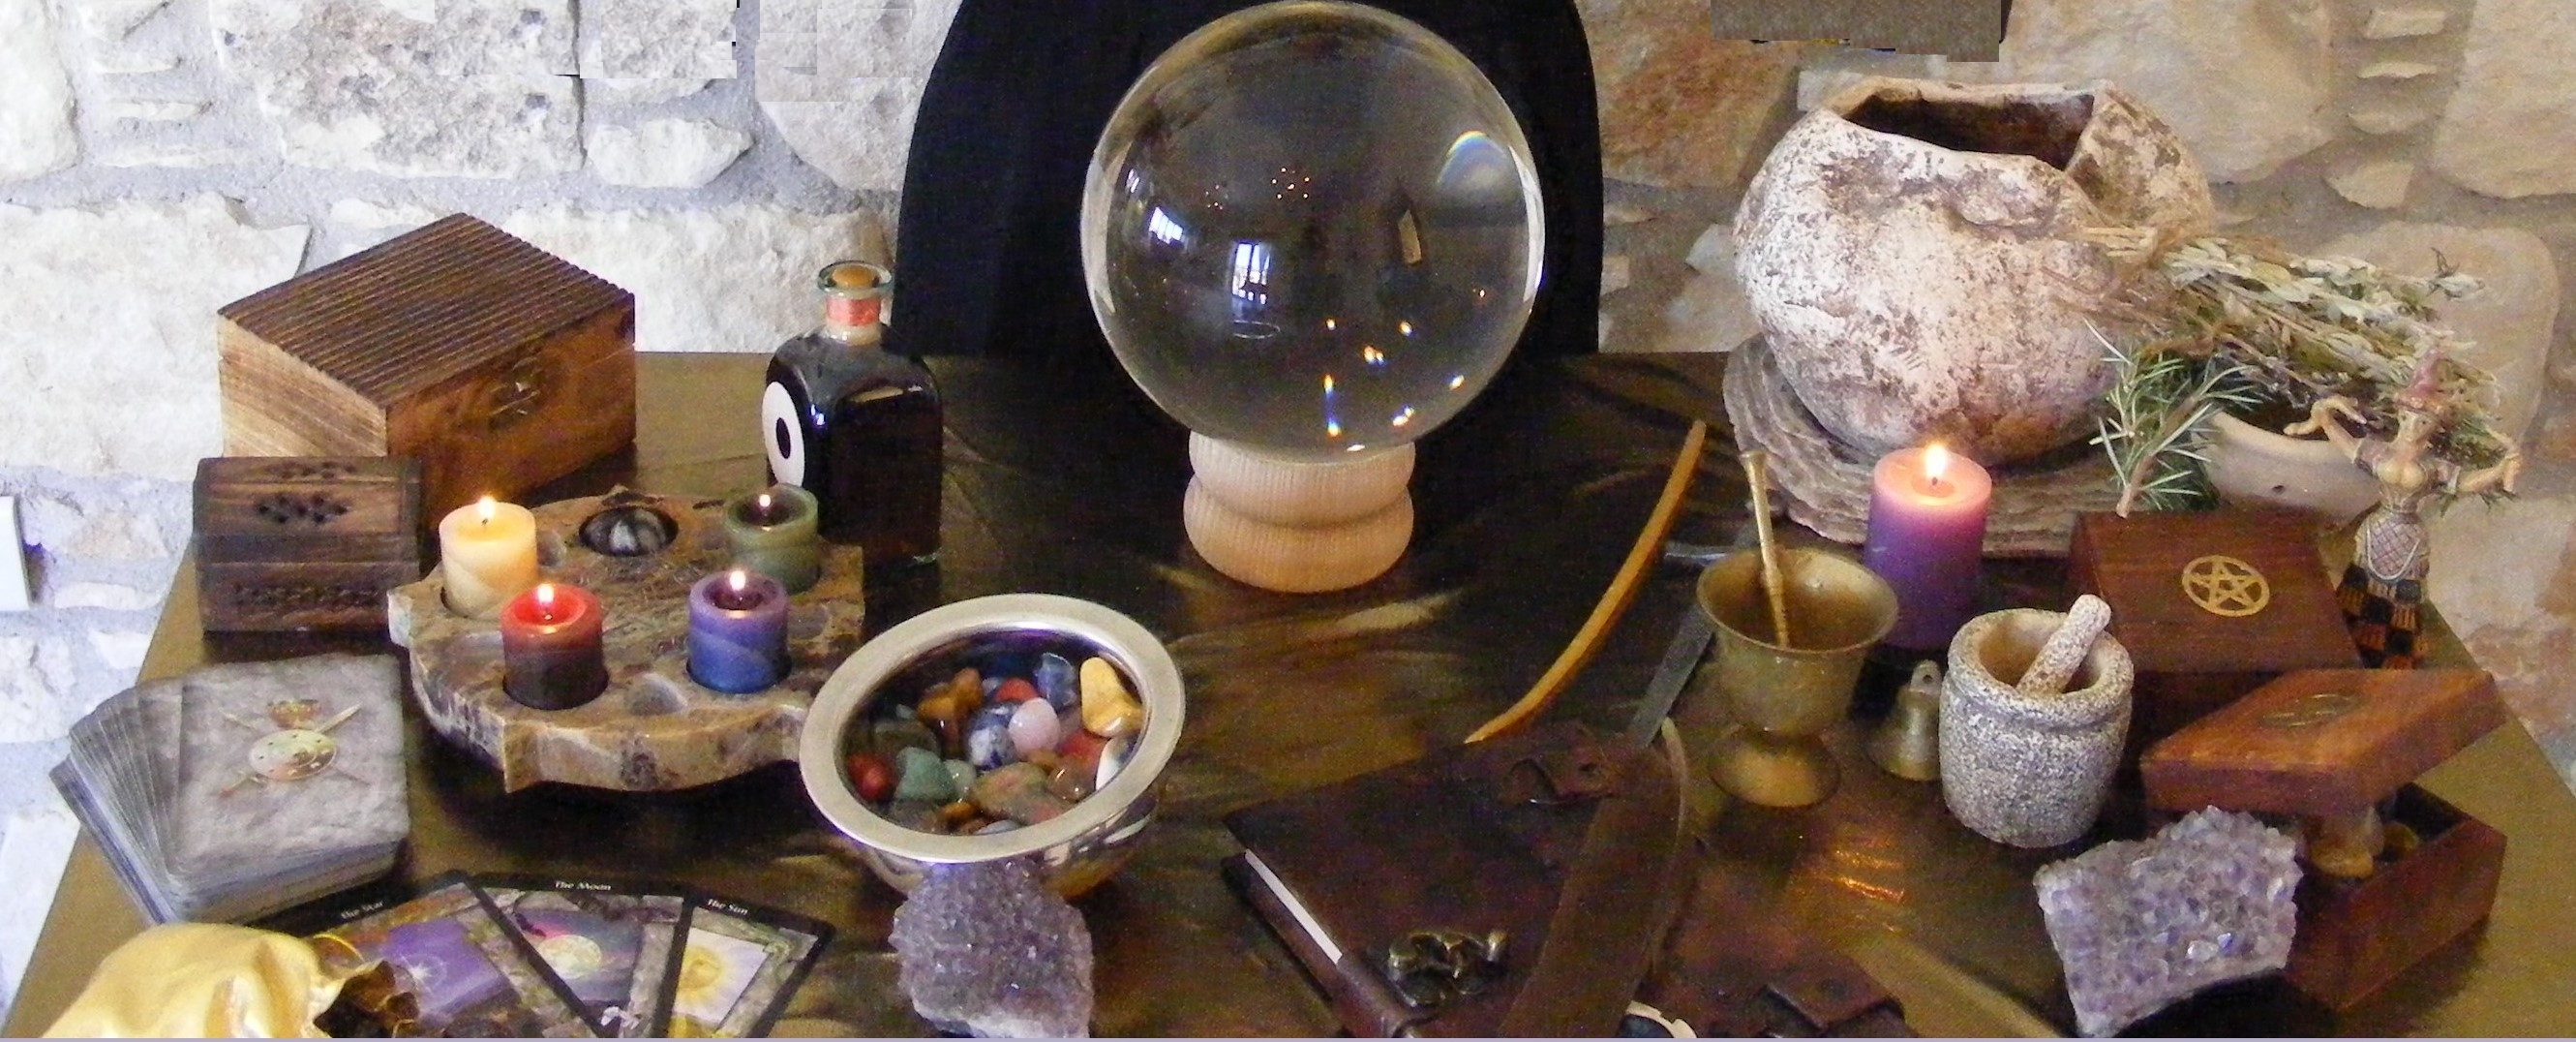 A Witches Altar full of materials for spell casting